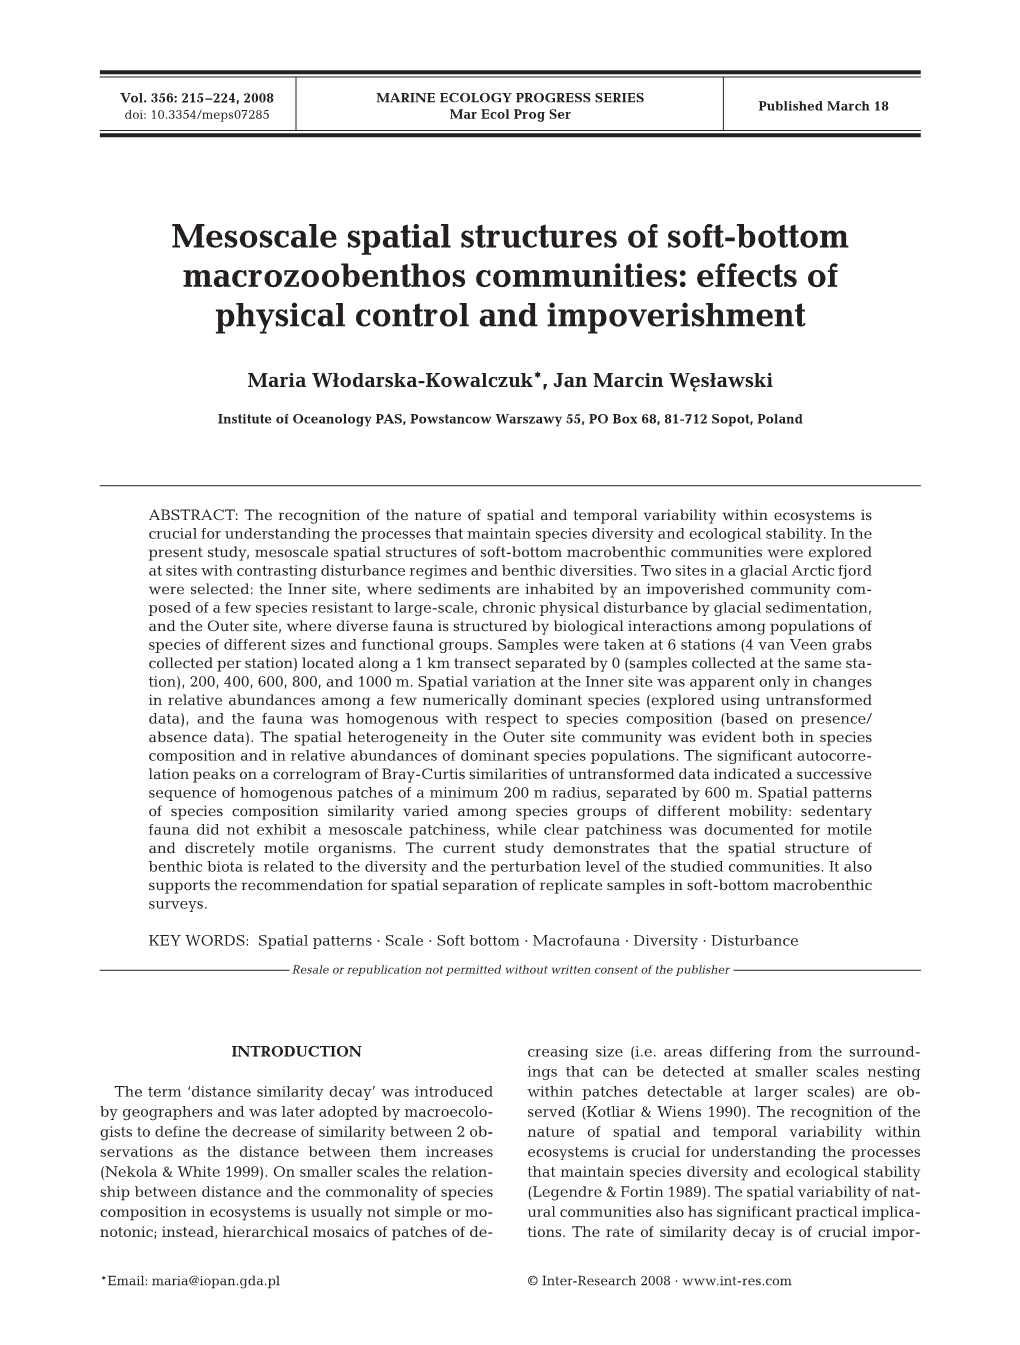 Mesoscale Spatial Structures of Soft-Bottom Macrozoobenthos Communities: Effects of Physical Control and Impoverishment